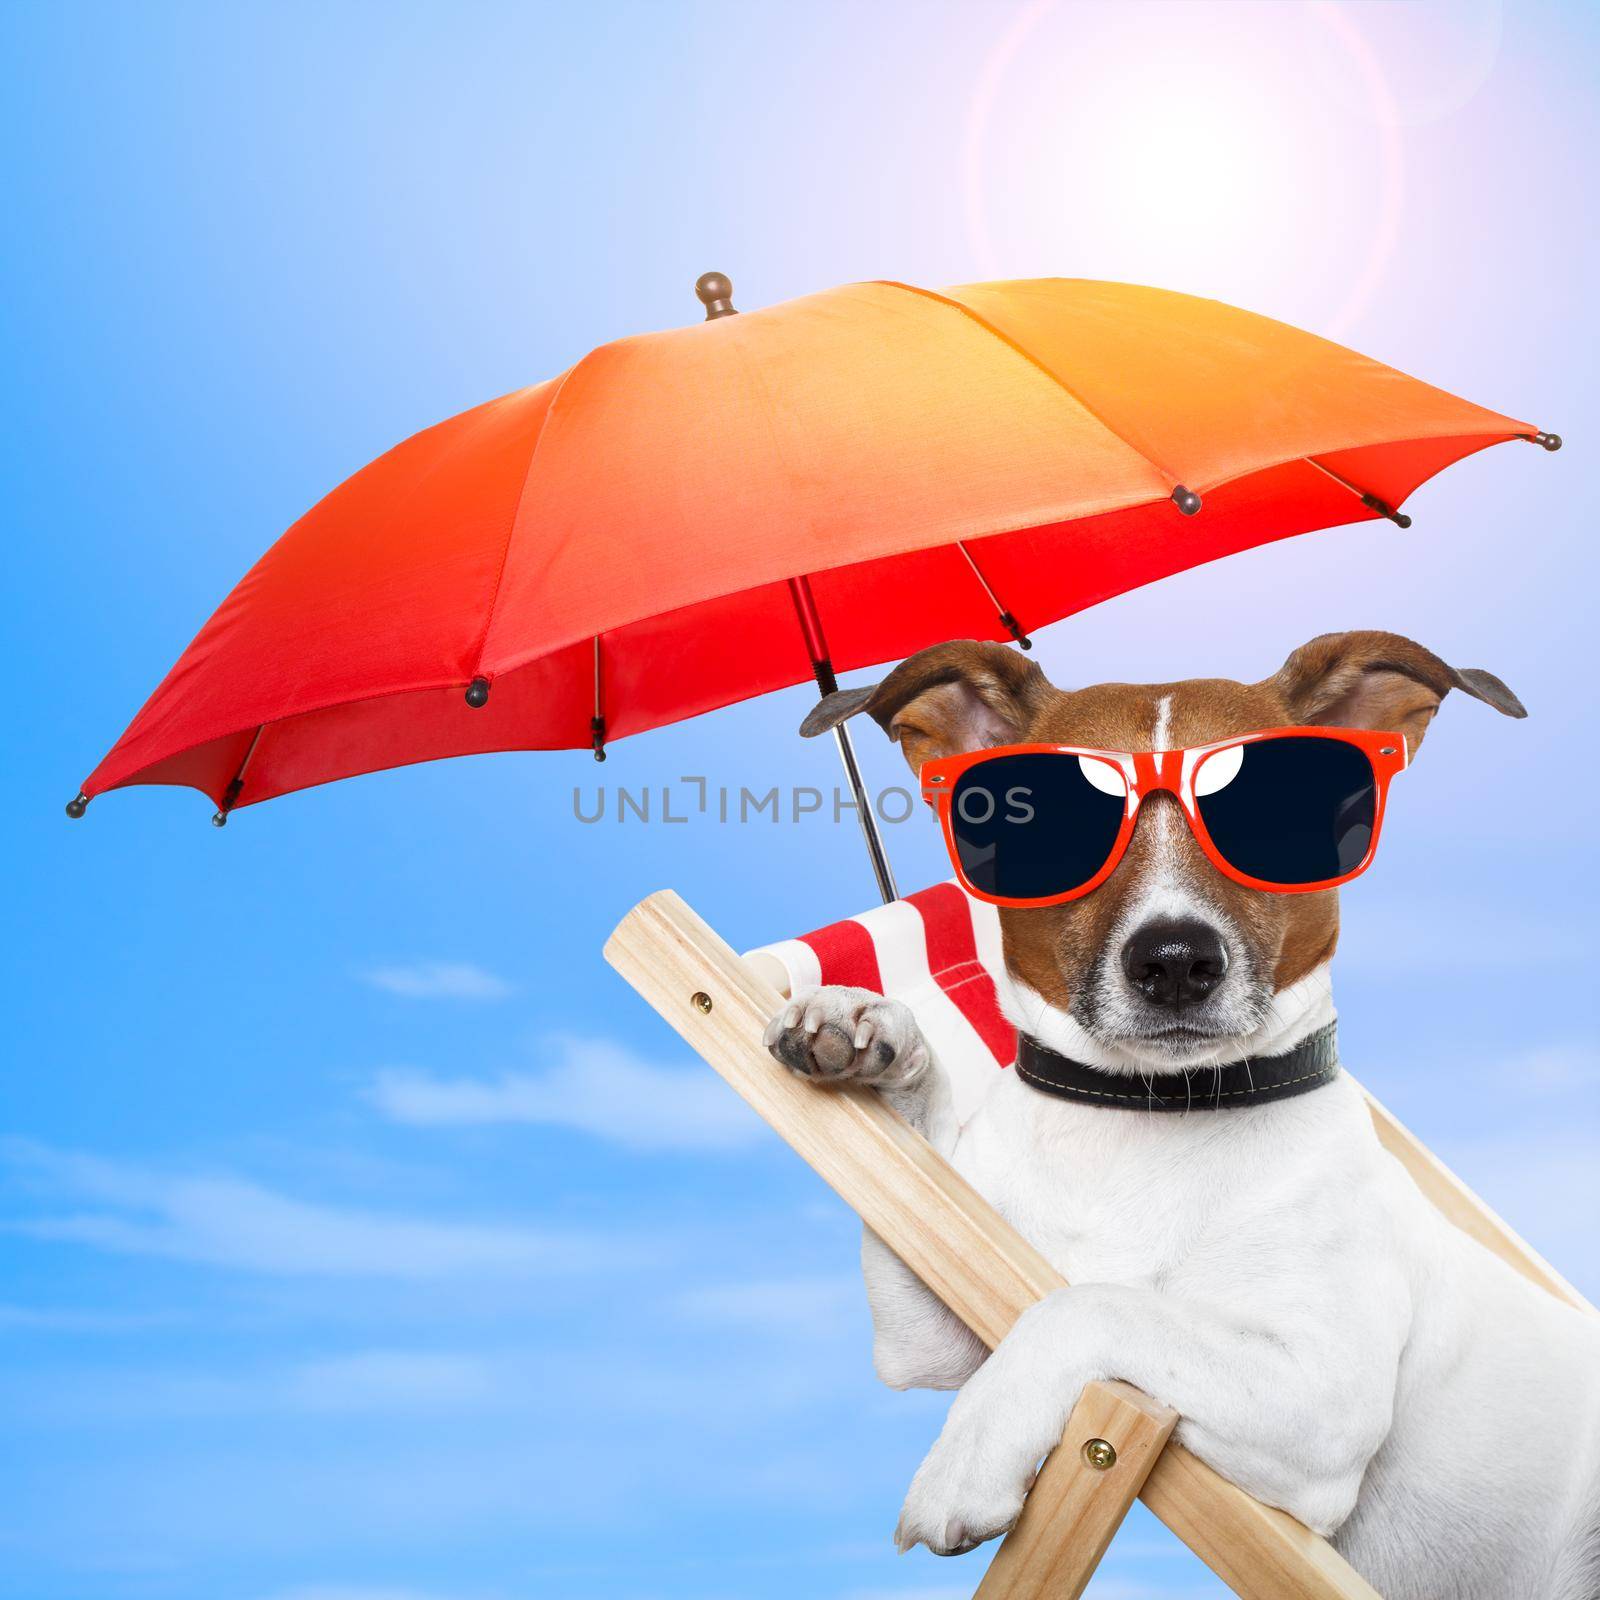 dog sunbathing on a deck chair with red umbrella